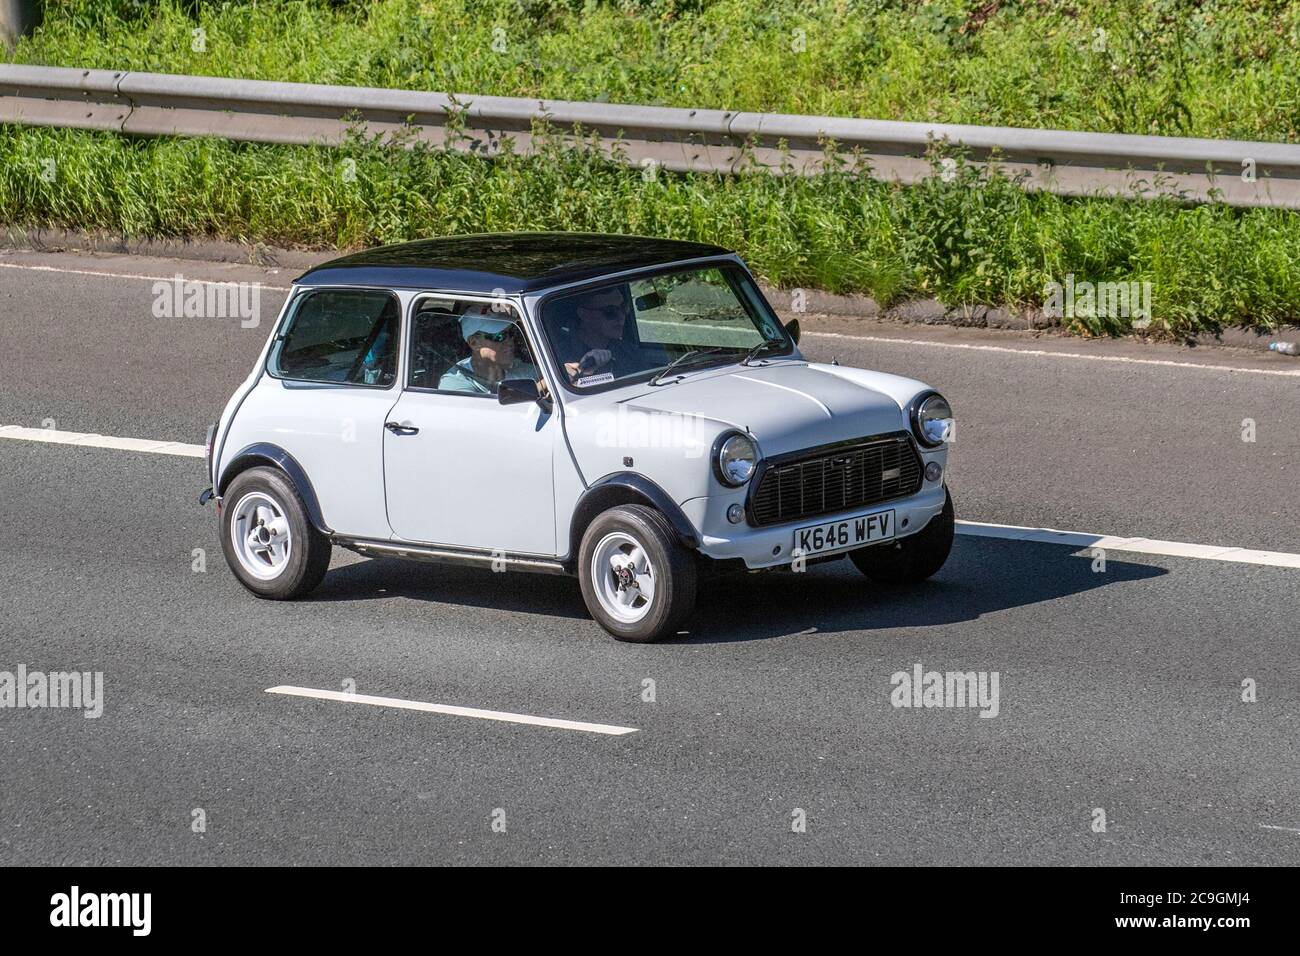 North West Classic Mini Owners club 1993 white Rover Mini Mayfair Auto; Vehicular traffic moving vehicles, cars driving vehicle on UK roads, motors, motoring on the M6 motorway highway network. Stock Photo